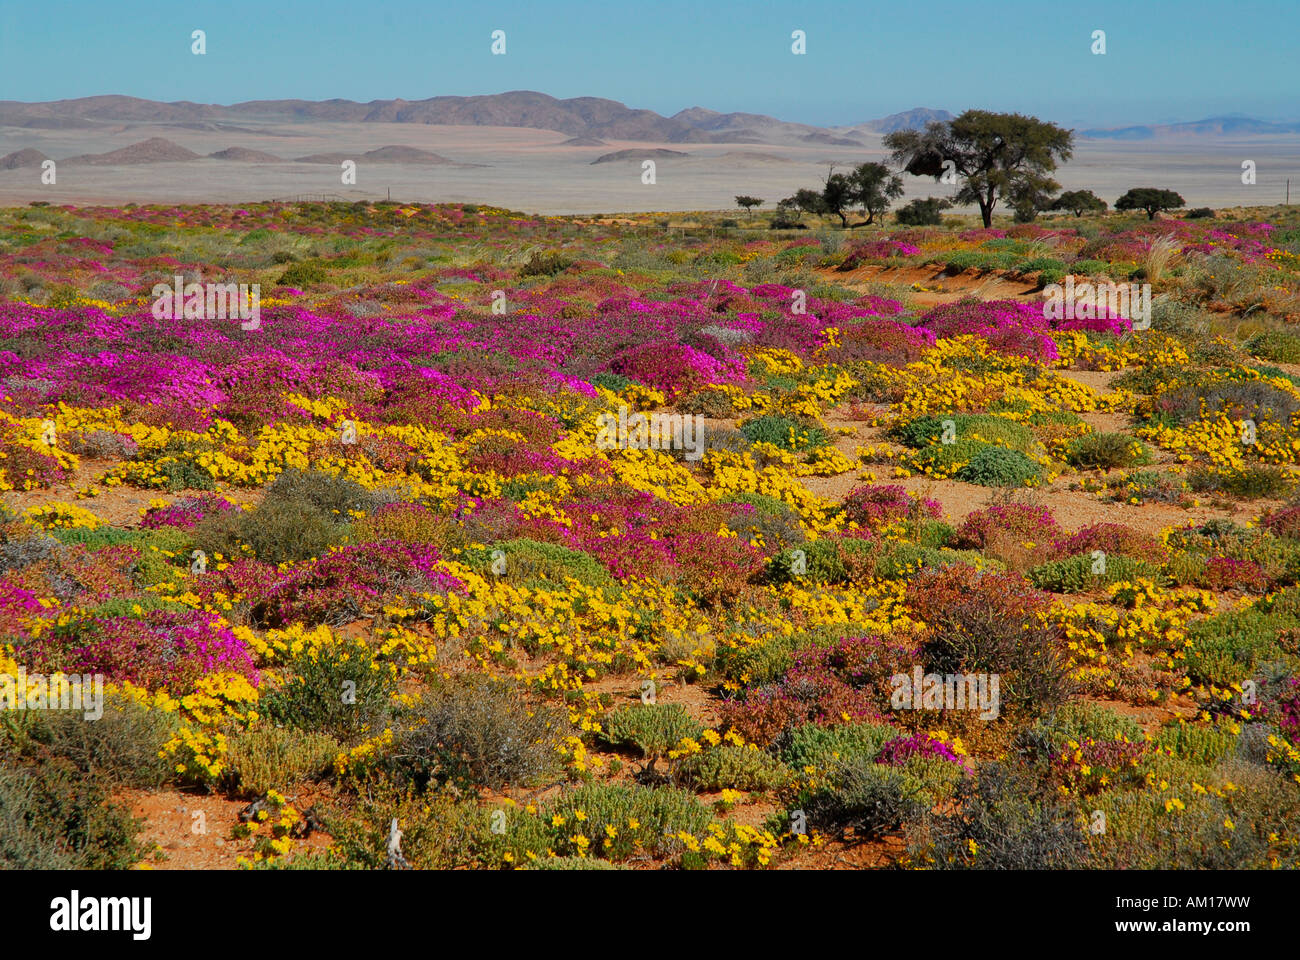 Flowers in the Namib desert after rainfall, Aus, Namibia Stock Photo